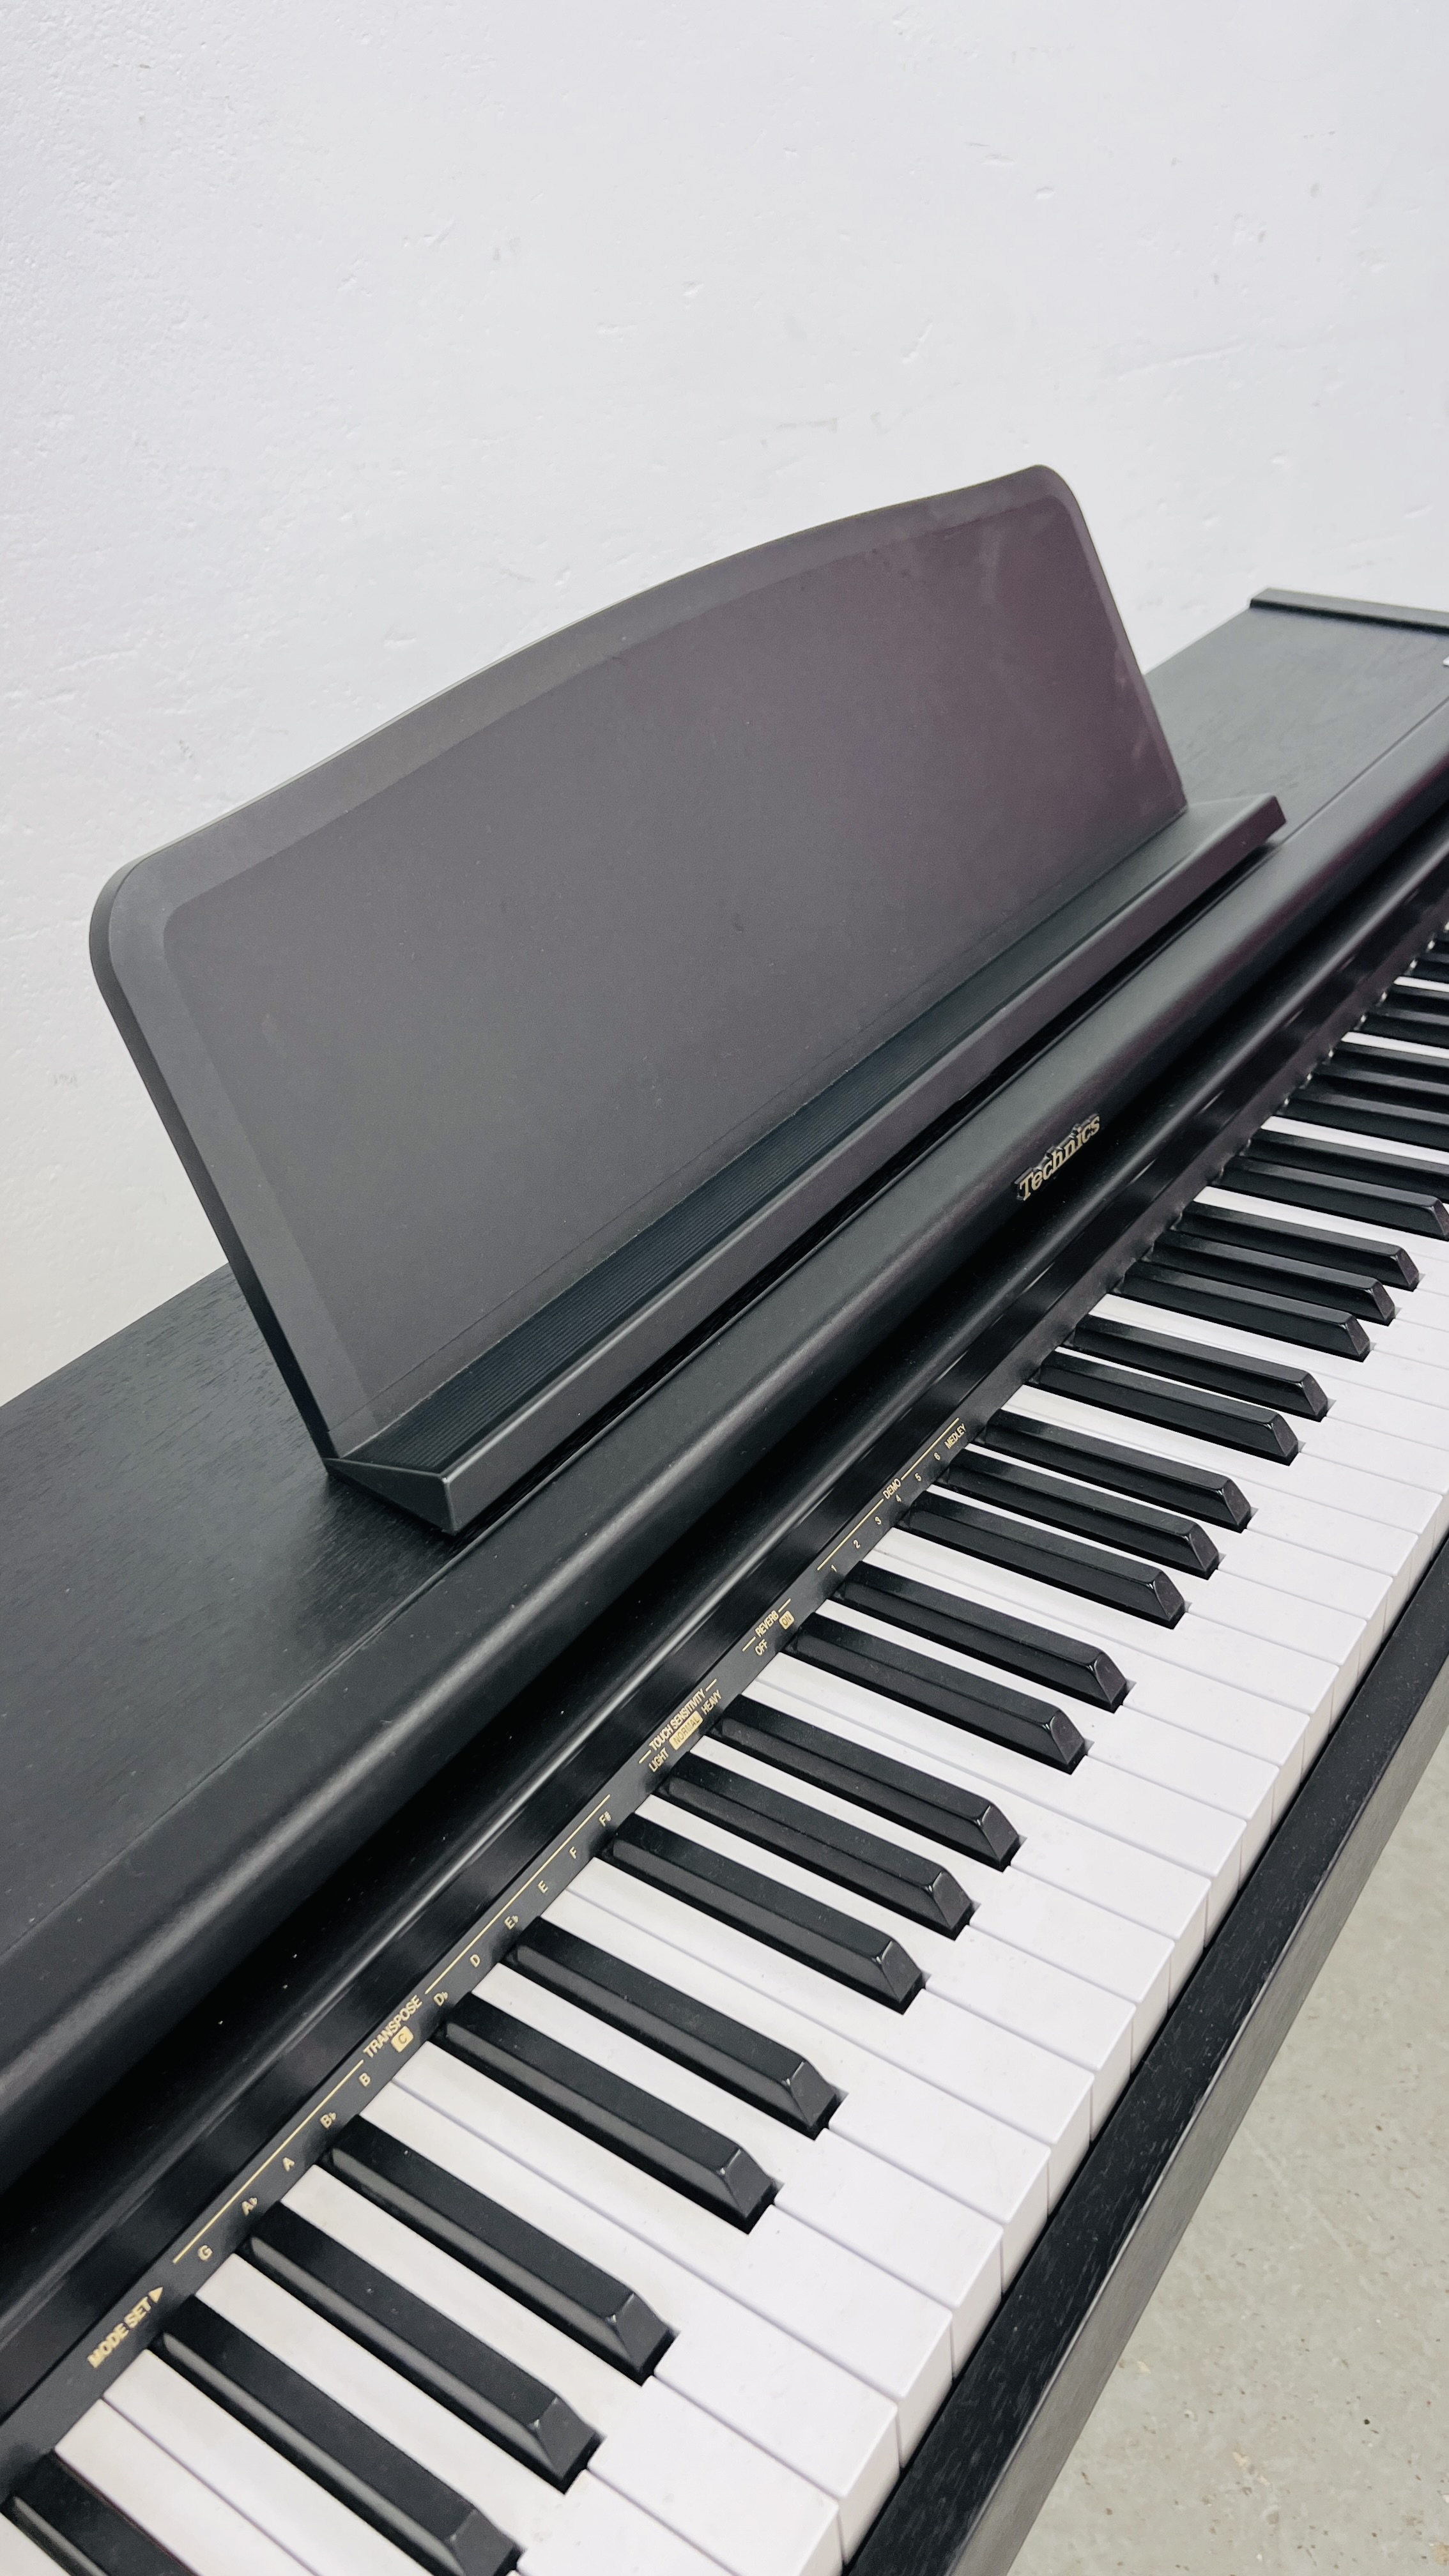 A TECHNICS SX-PC25 DIGITAL PIANO - SOLD AS SEEN - Image 7 of 8